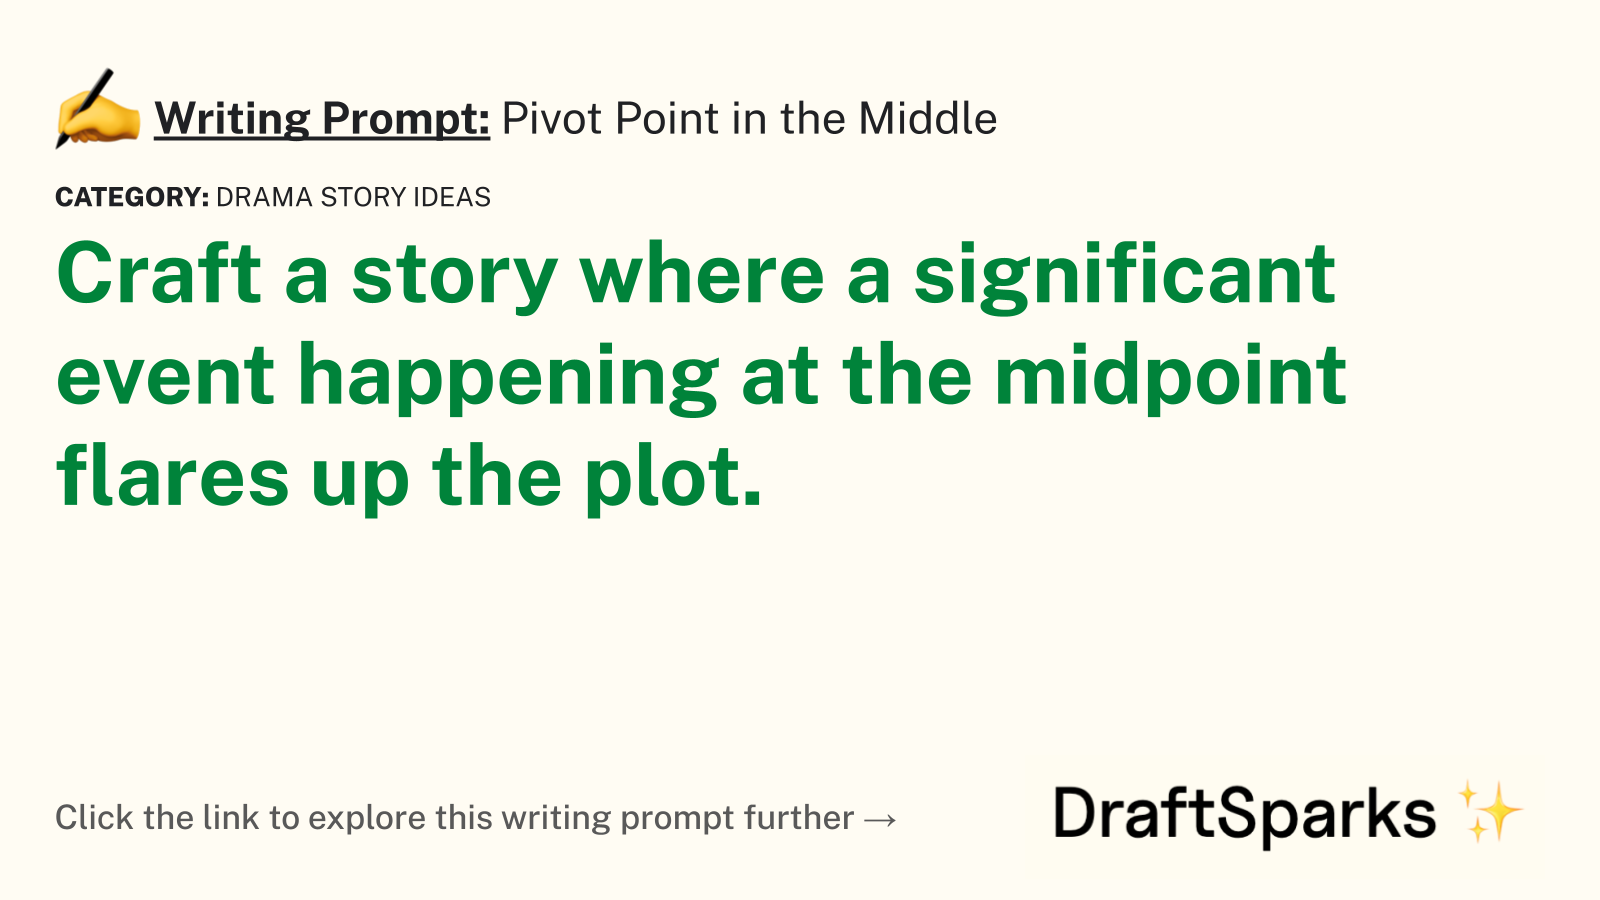 Pivot Point in the Middle